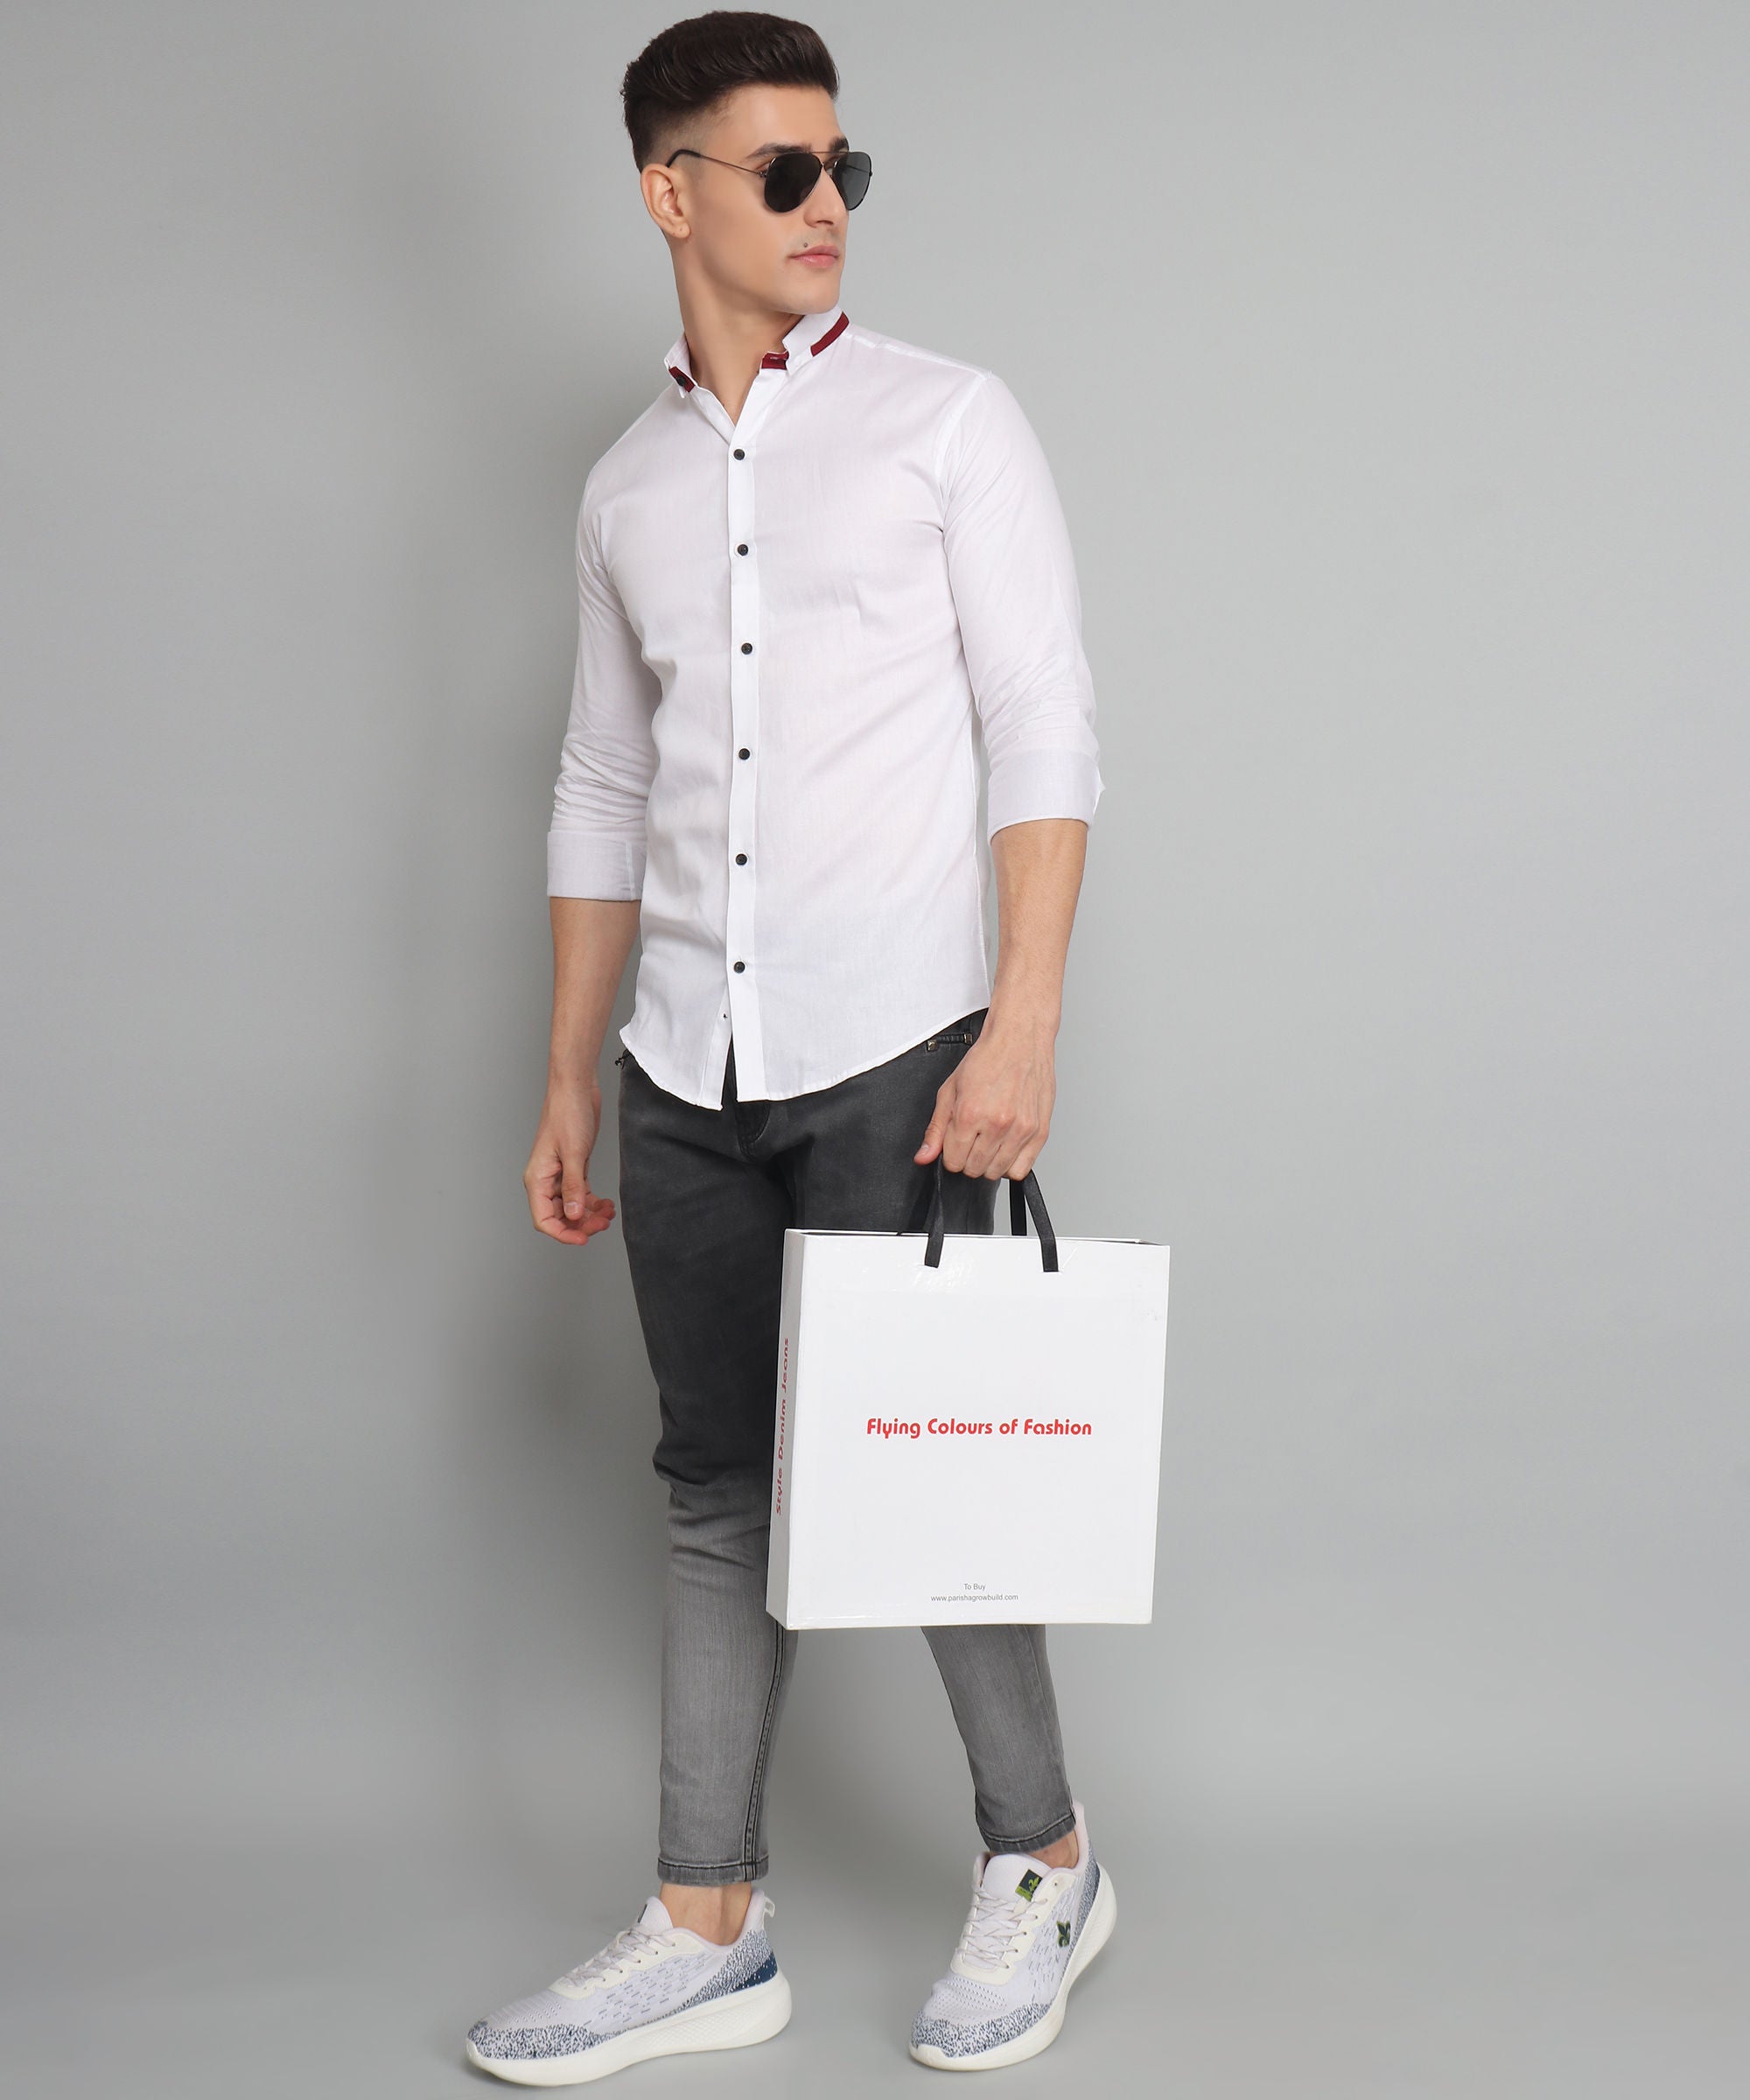 a man holding a shopping bag and wearing sunglasses